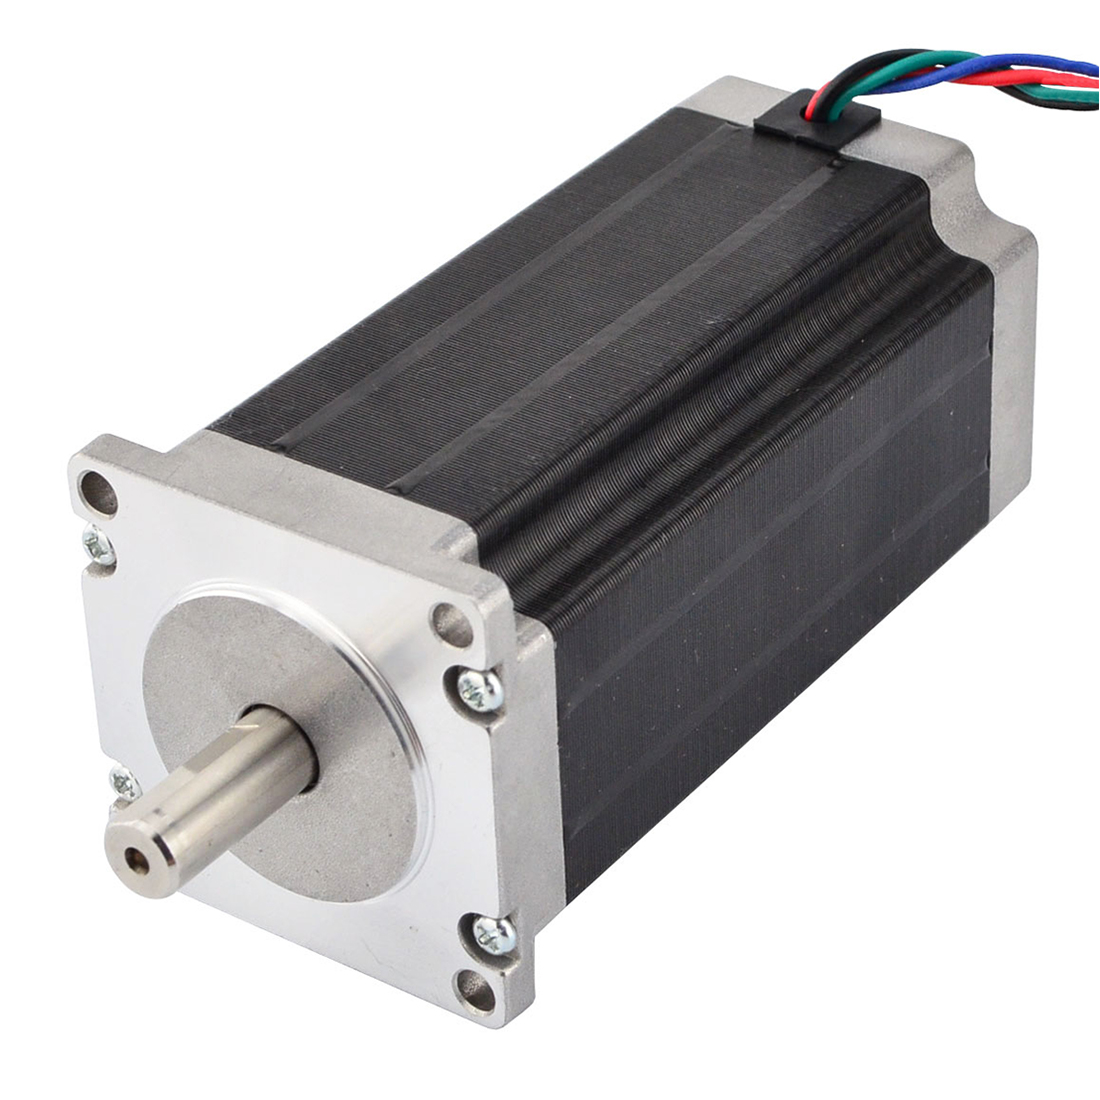 Nema 23 Stepper Motor Bipolar 3Nm 425oz.in 3.5A 114mm Length 4 Wires CNC Router 